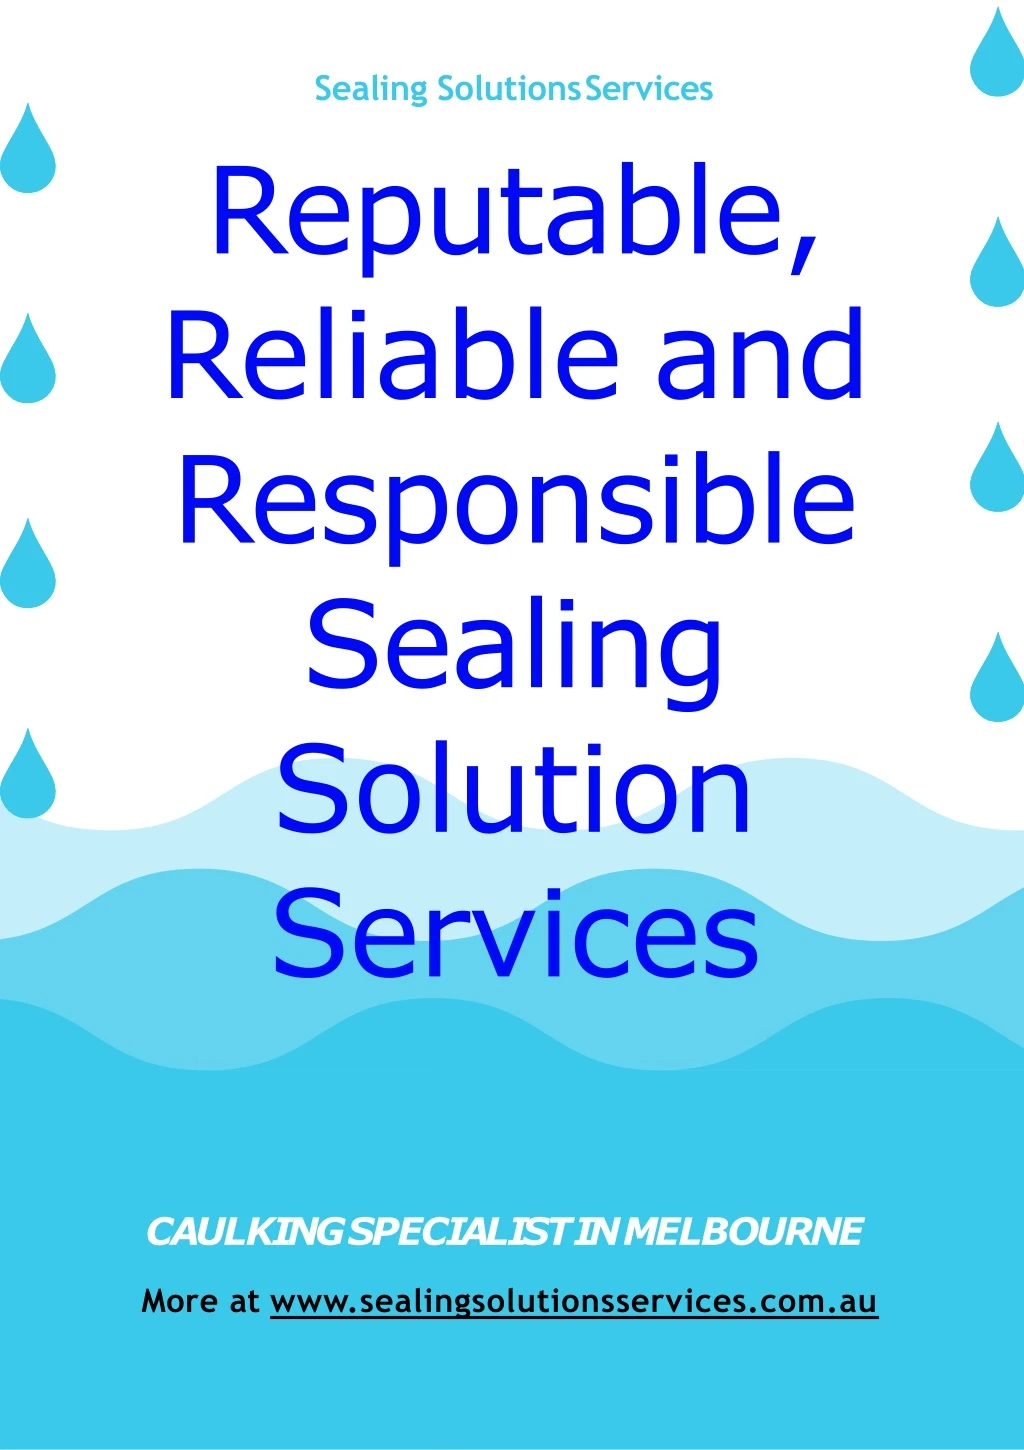 sealing solutionsservices reputable reliable